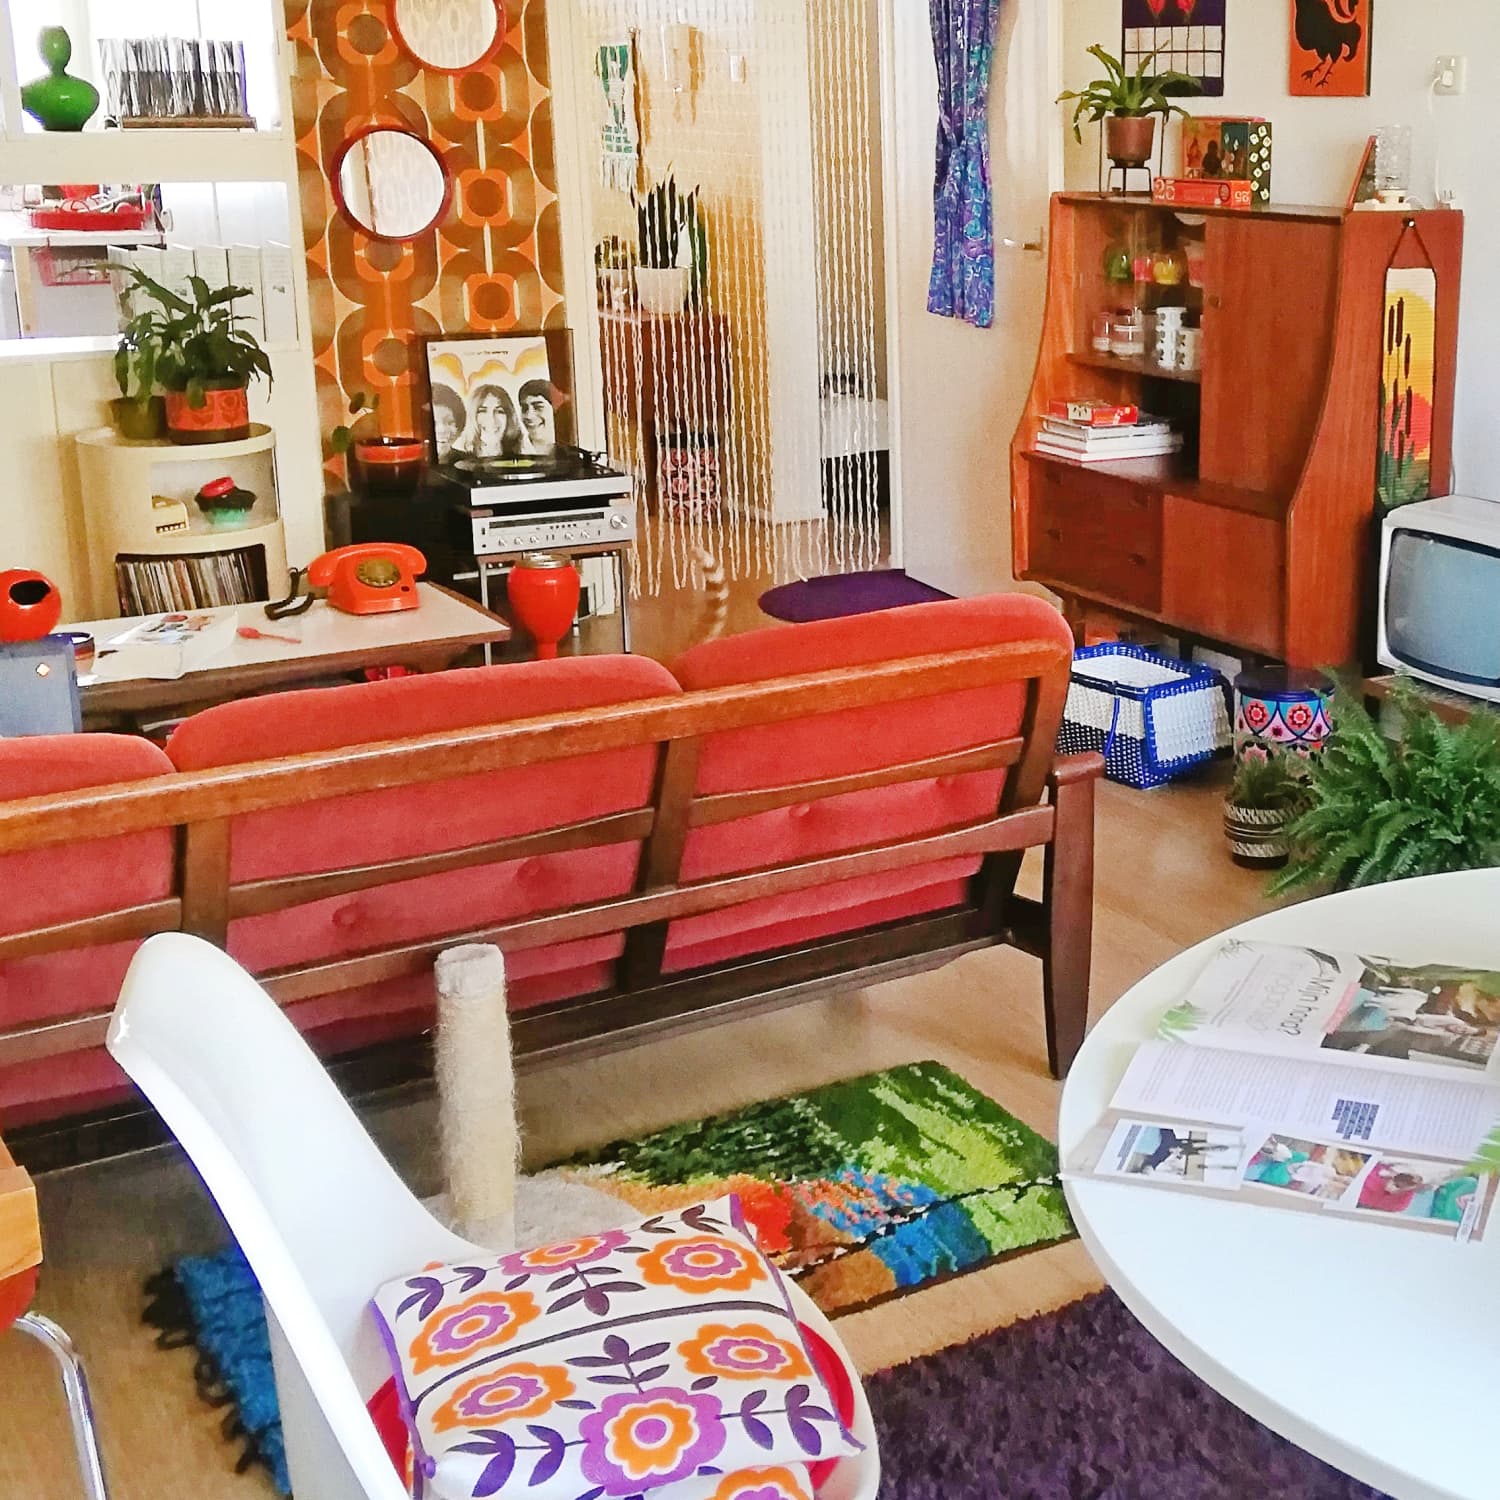 A Home Decorated Only In Sixties and Seventies Decor | Apartment ...